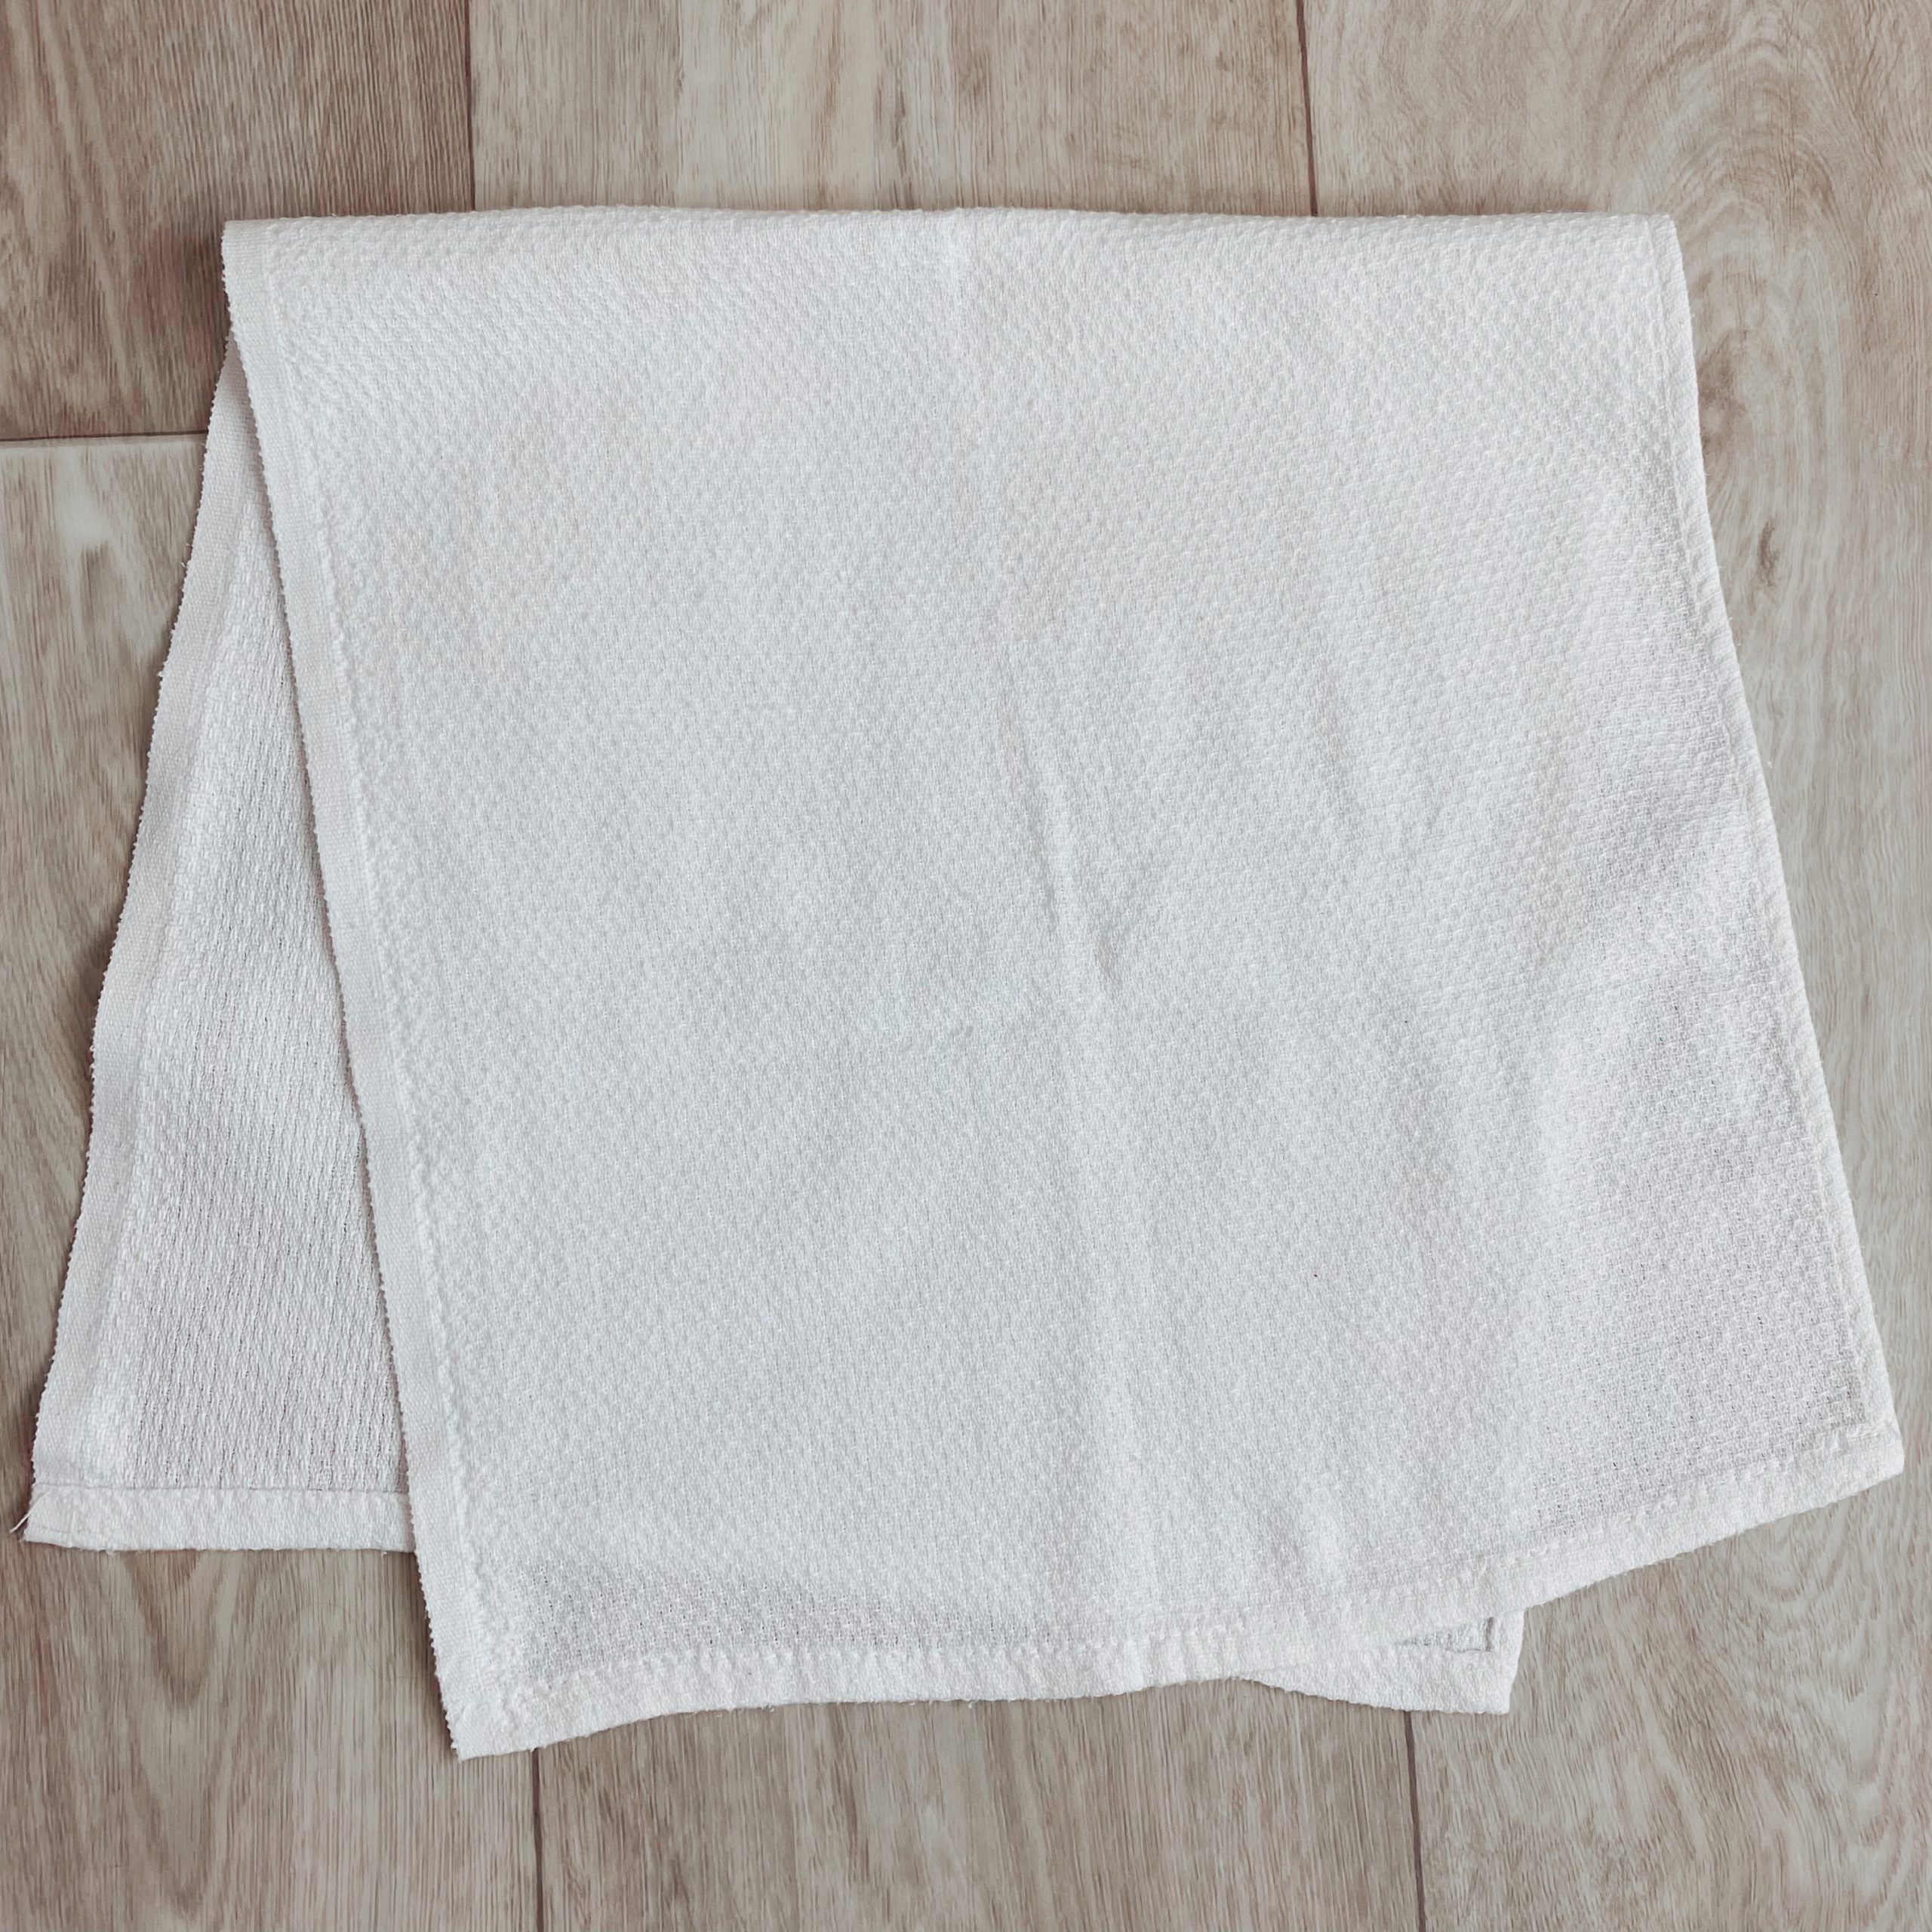 New White Surgical Huck Towels